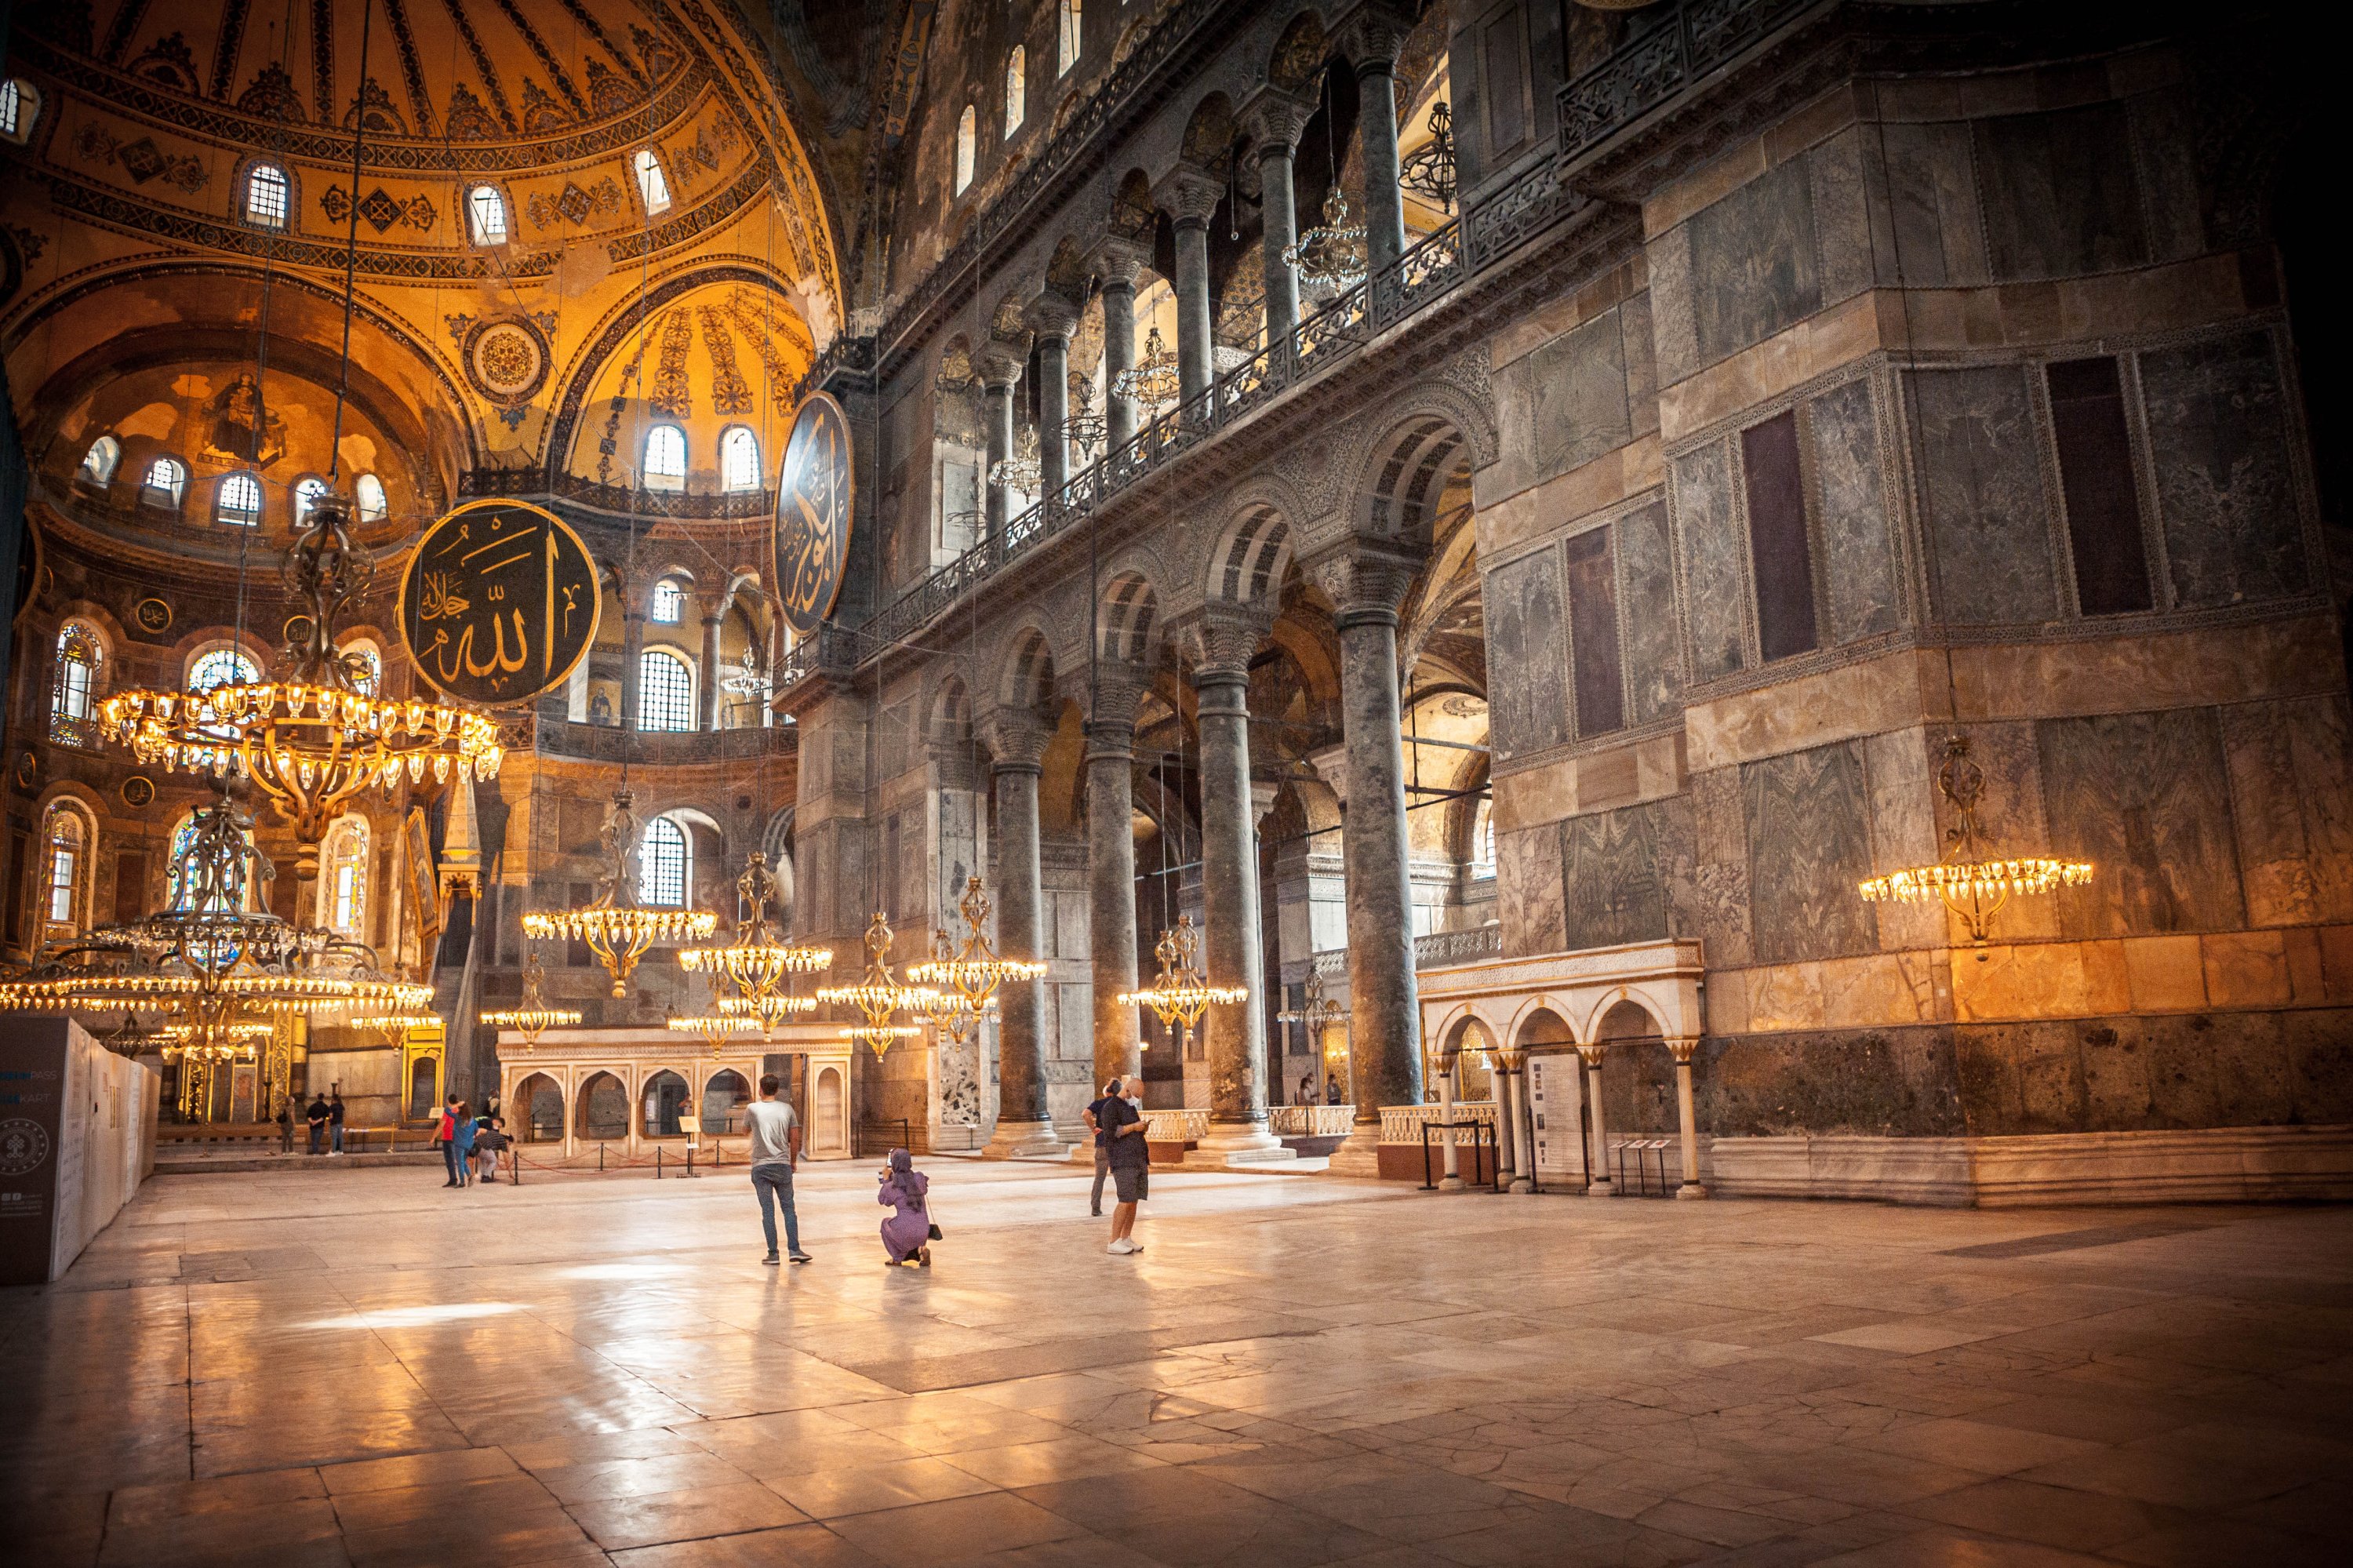 The interior of Hagia Sophia, which was put under protection with a foundation established by Sultan Mehmed II. (Photo by Hatice Çınar)